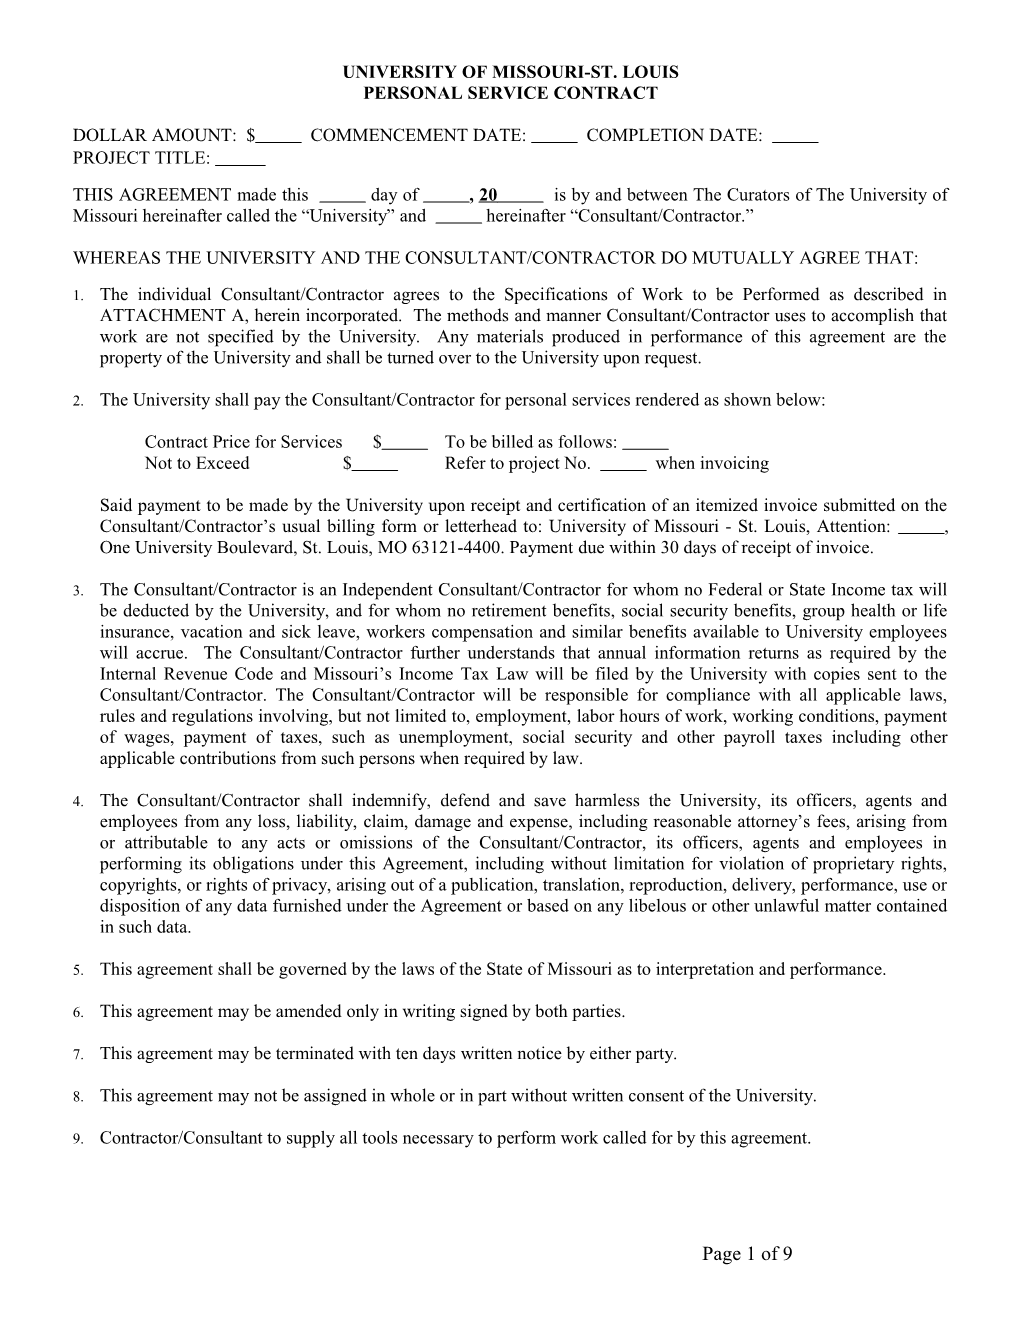 Personal Service Agreement